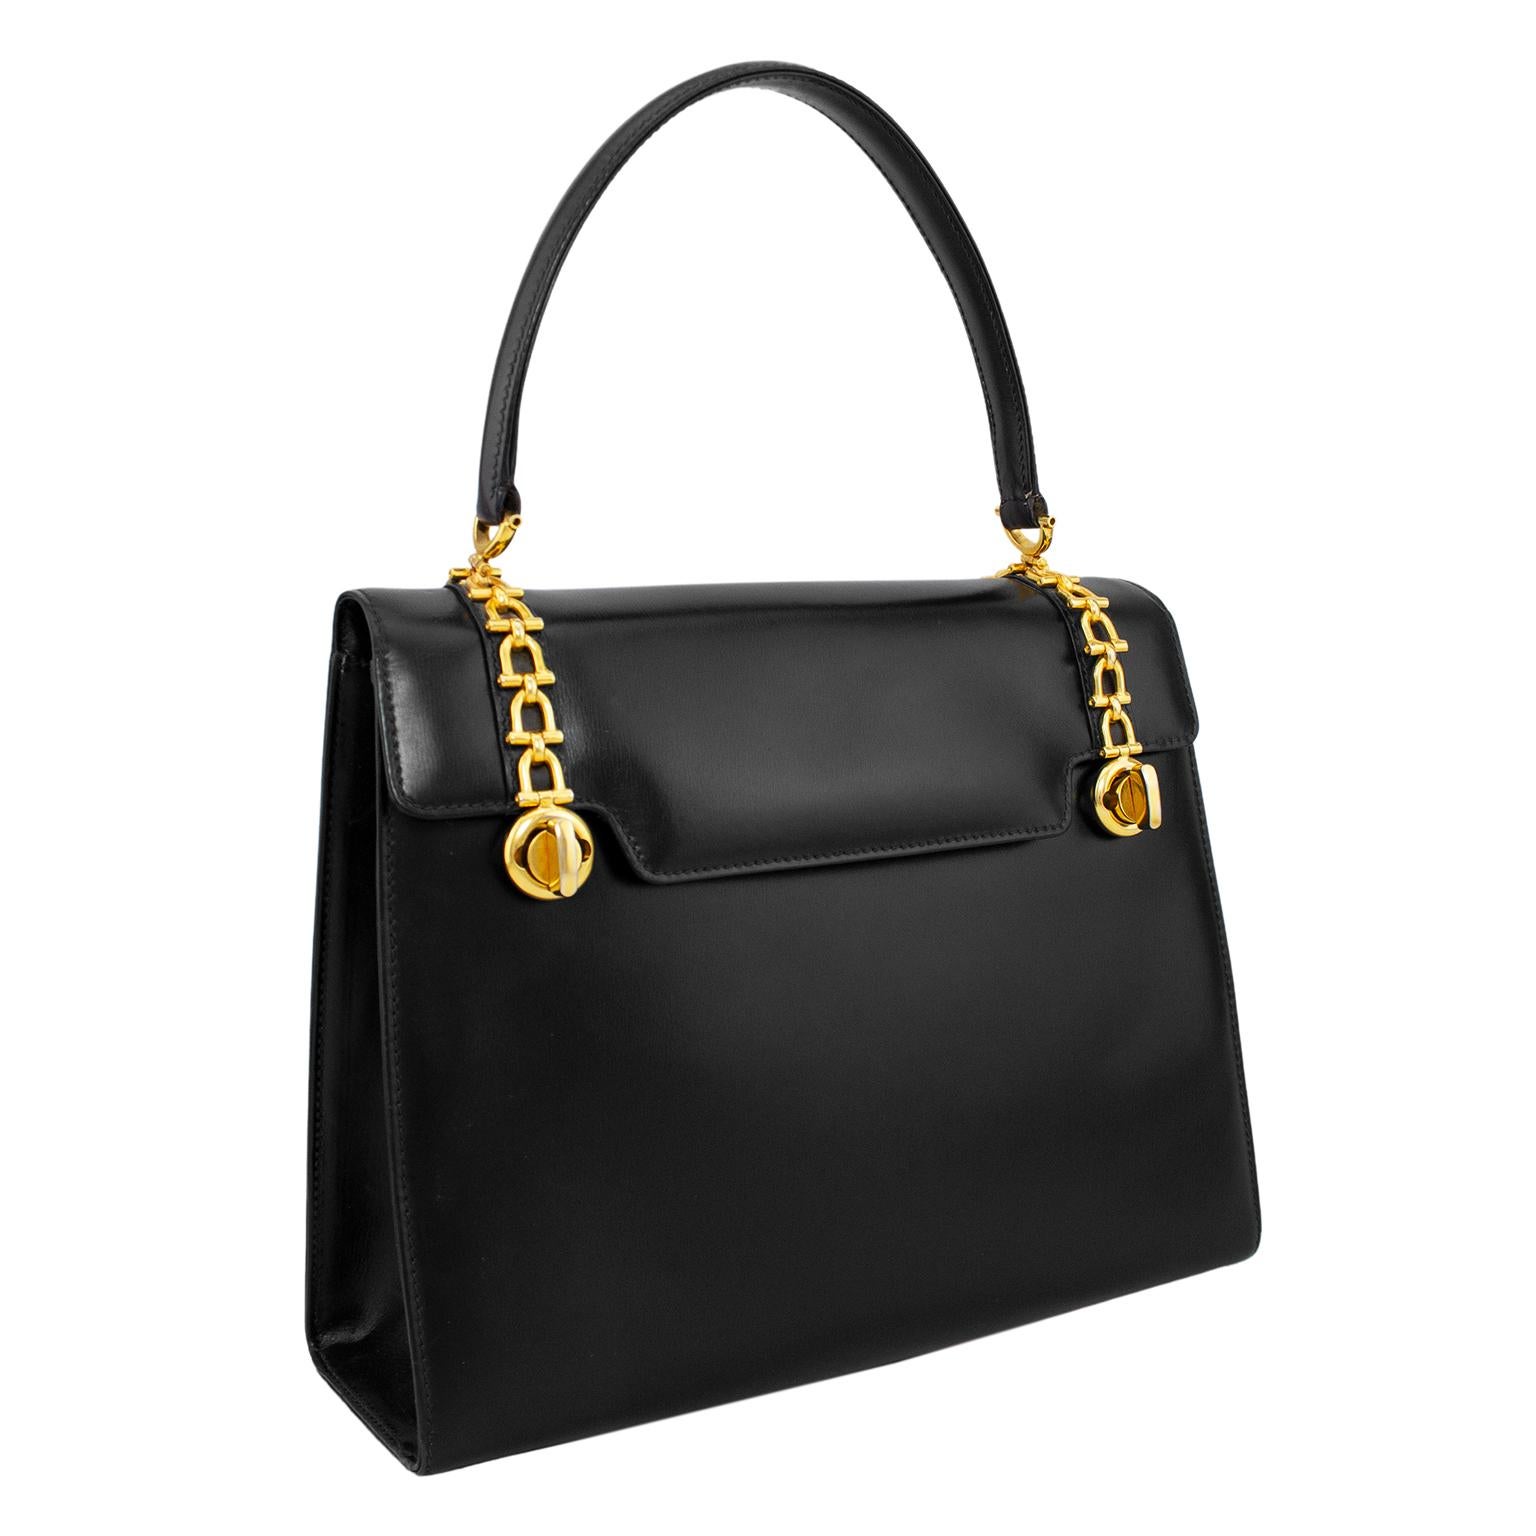 Stunning 1970's Gucci bag. A classic box shape with a single top handle and envelope style flap closure. The butter soft black leather is nicely contrasted by the gold tone metal horse bit details on flap. Bit detail trim ends with two twist locks